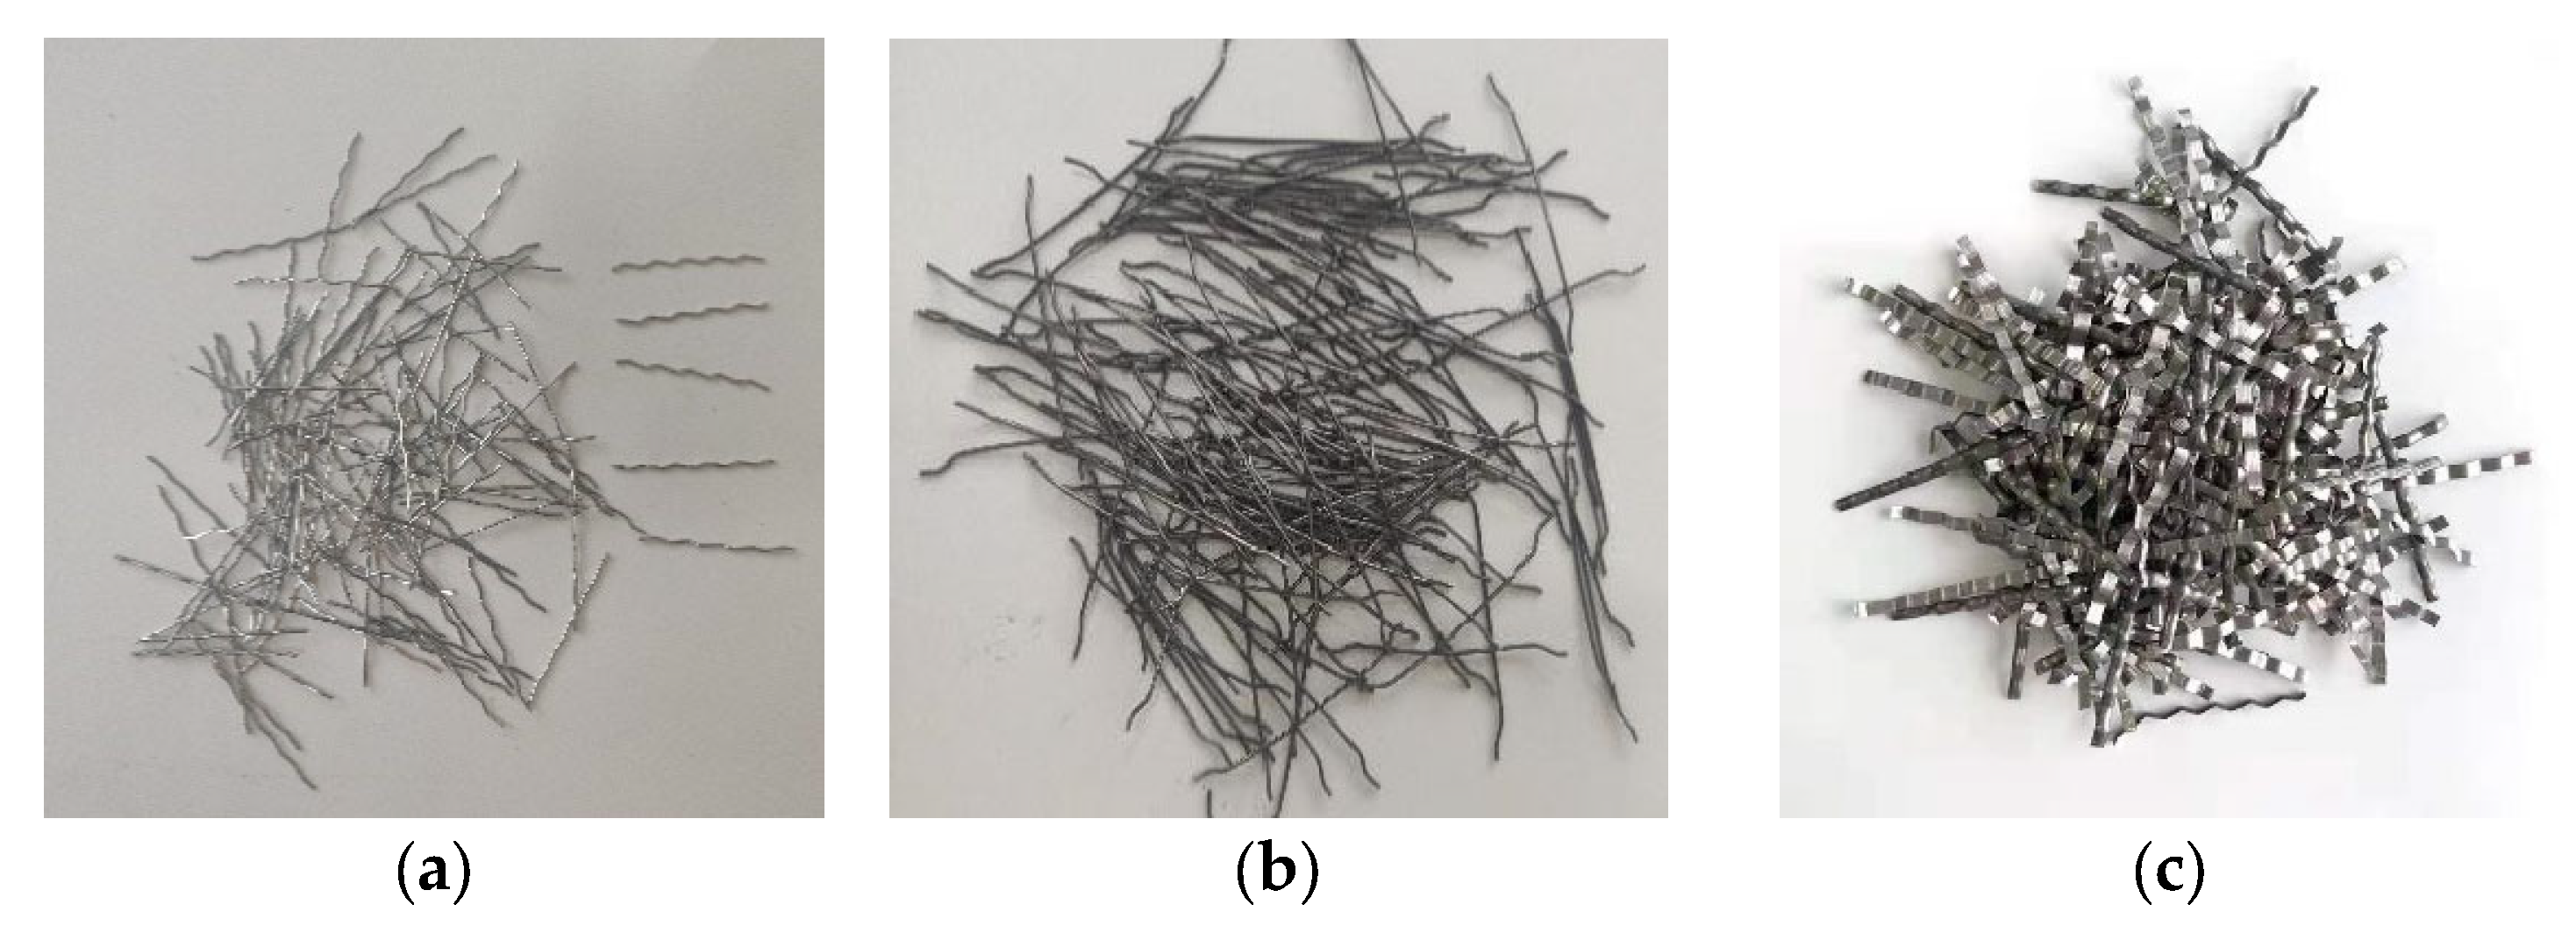 Types of recycled fibers used in R-FRC: recycled metallic fibers